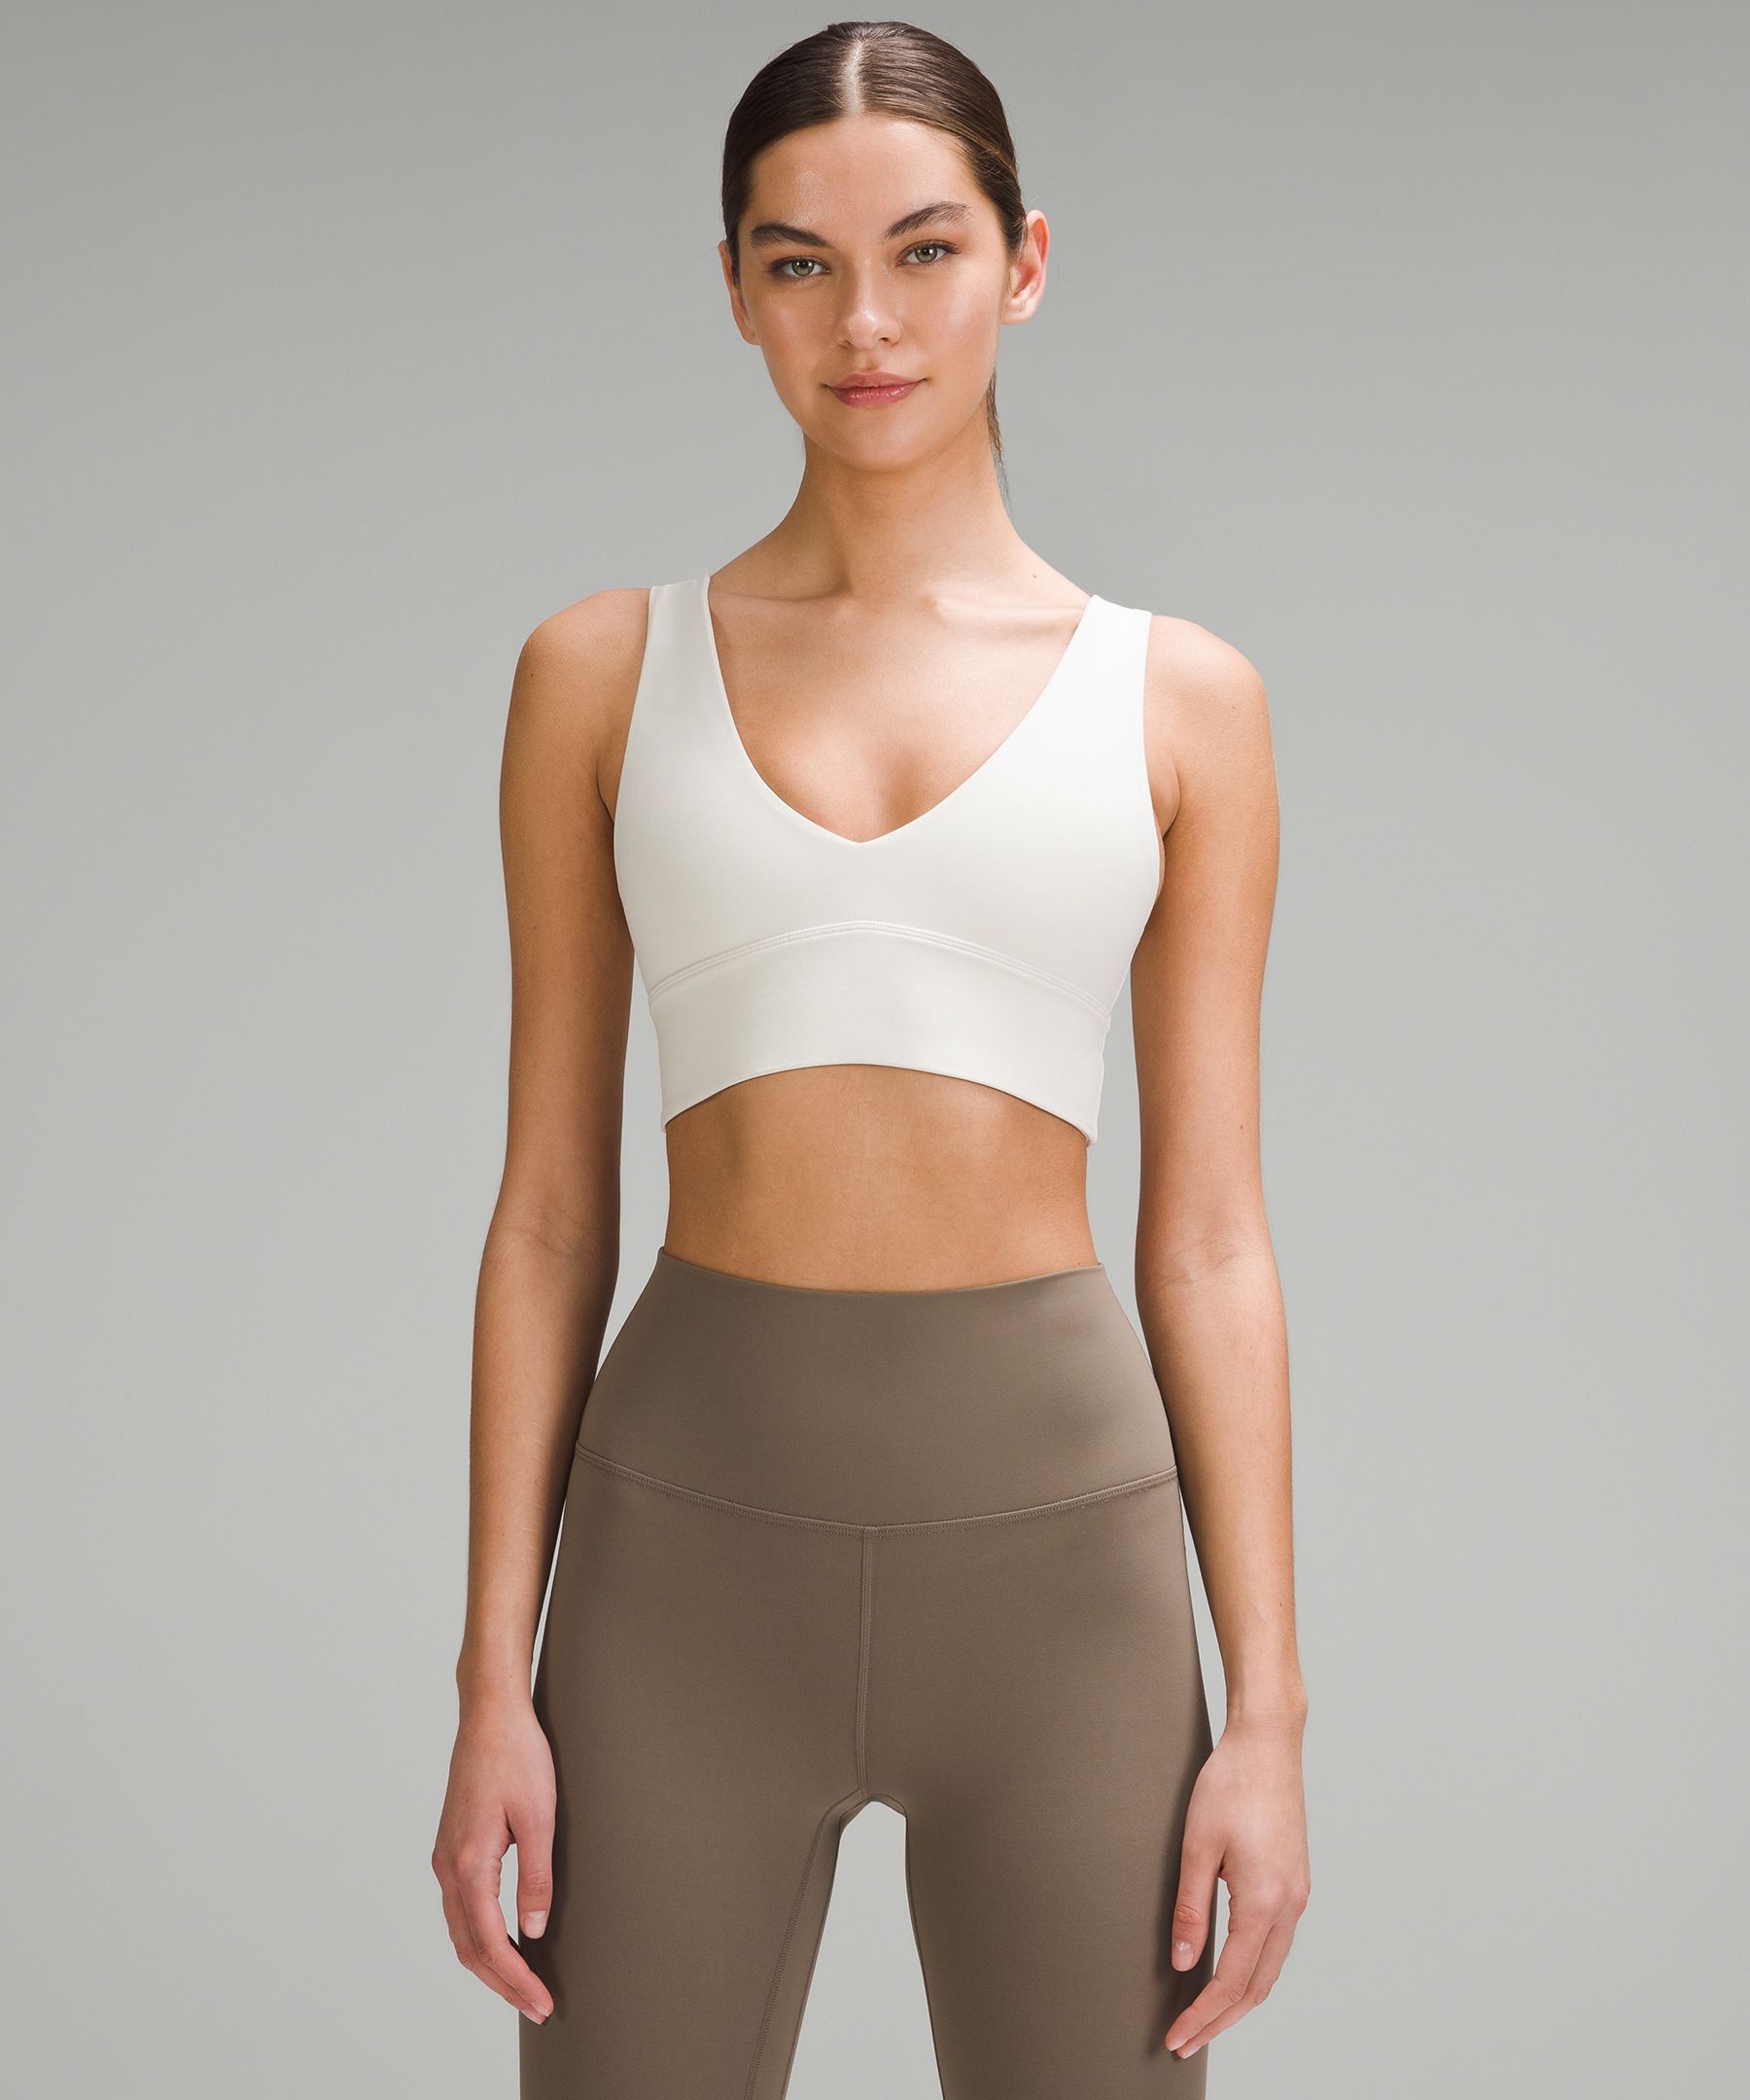 lululemon - Pair this long-line v-neck bra with a pair of high-rise bottoms  for hot yoga classes. Sheer details along the neckline and underband give  you extra airflow. Meet the Find Focus